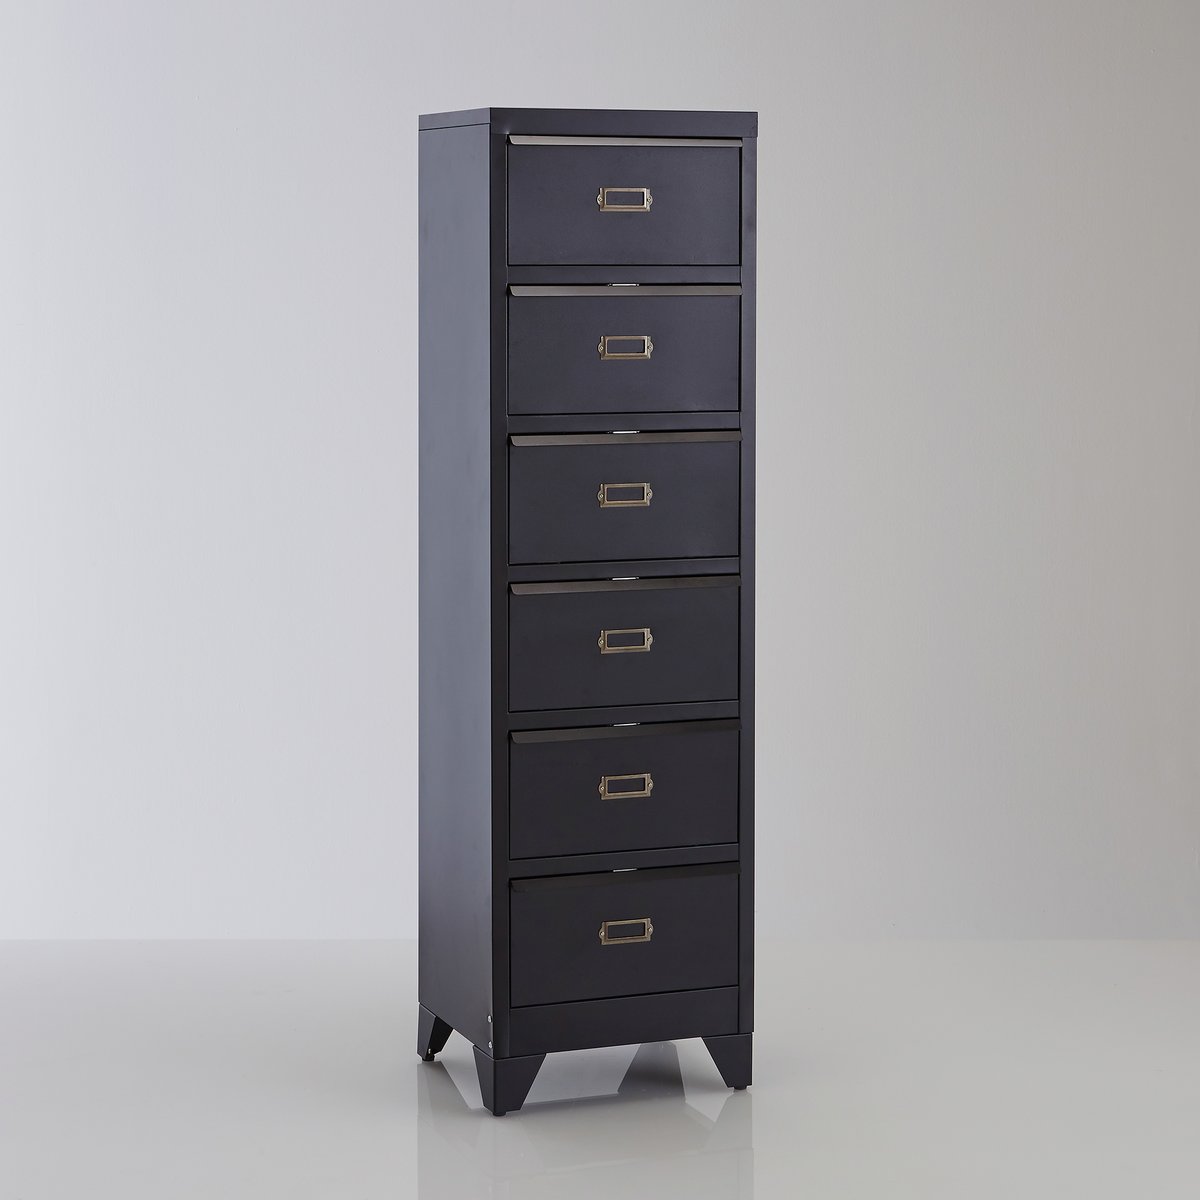 Image of Hiba Metal Storage Unit with 6 Shutter Drawers